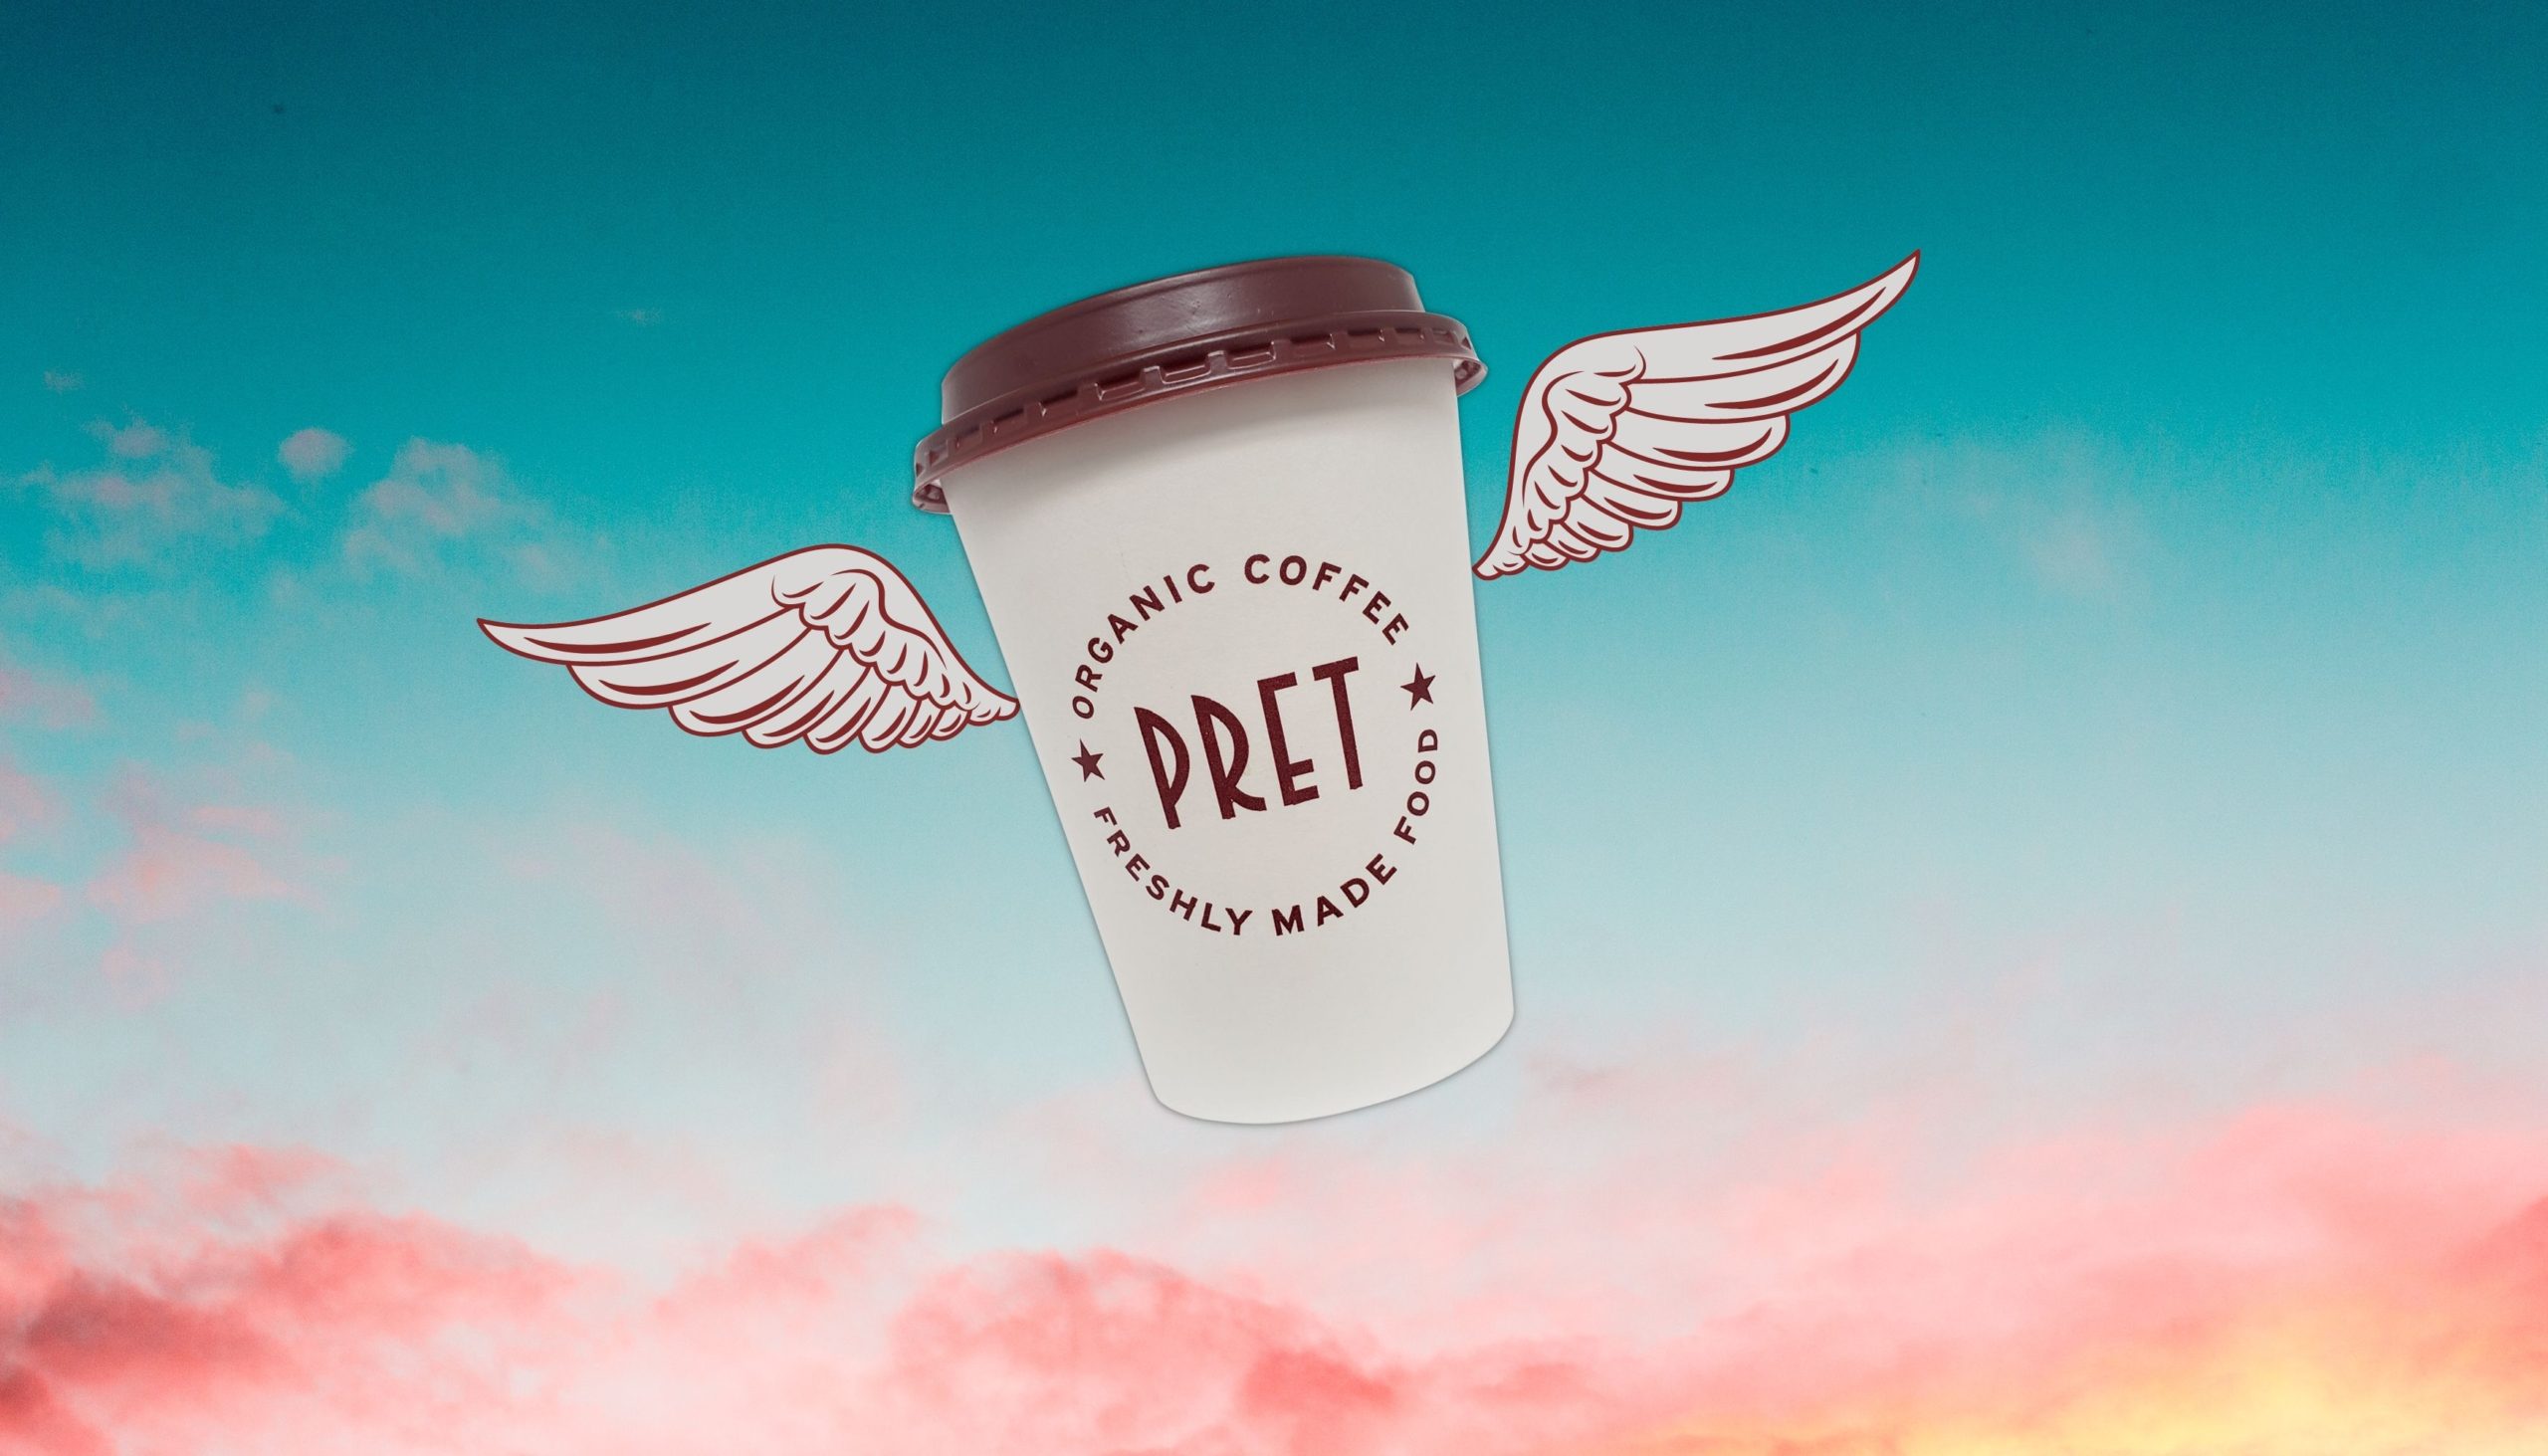 Pret Express:  Are Pret A Manger are heading down the vending tube?